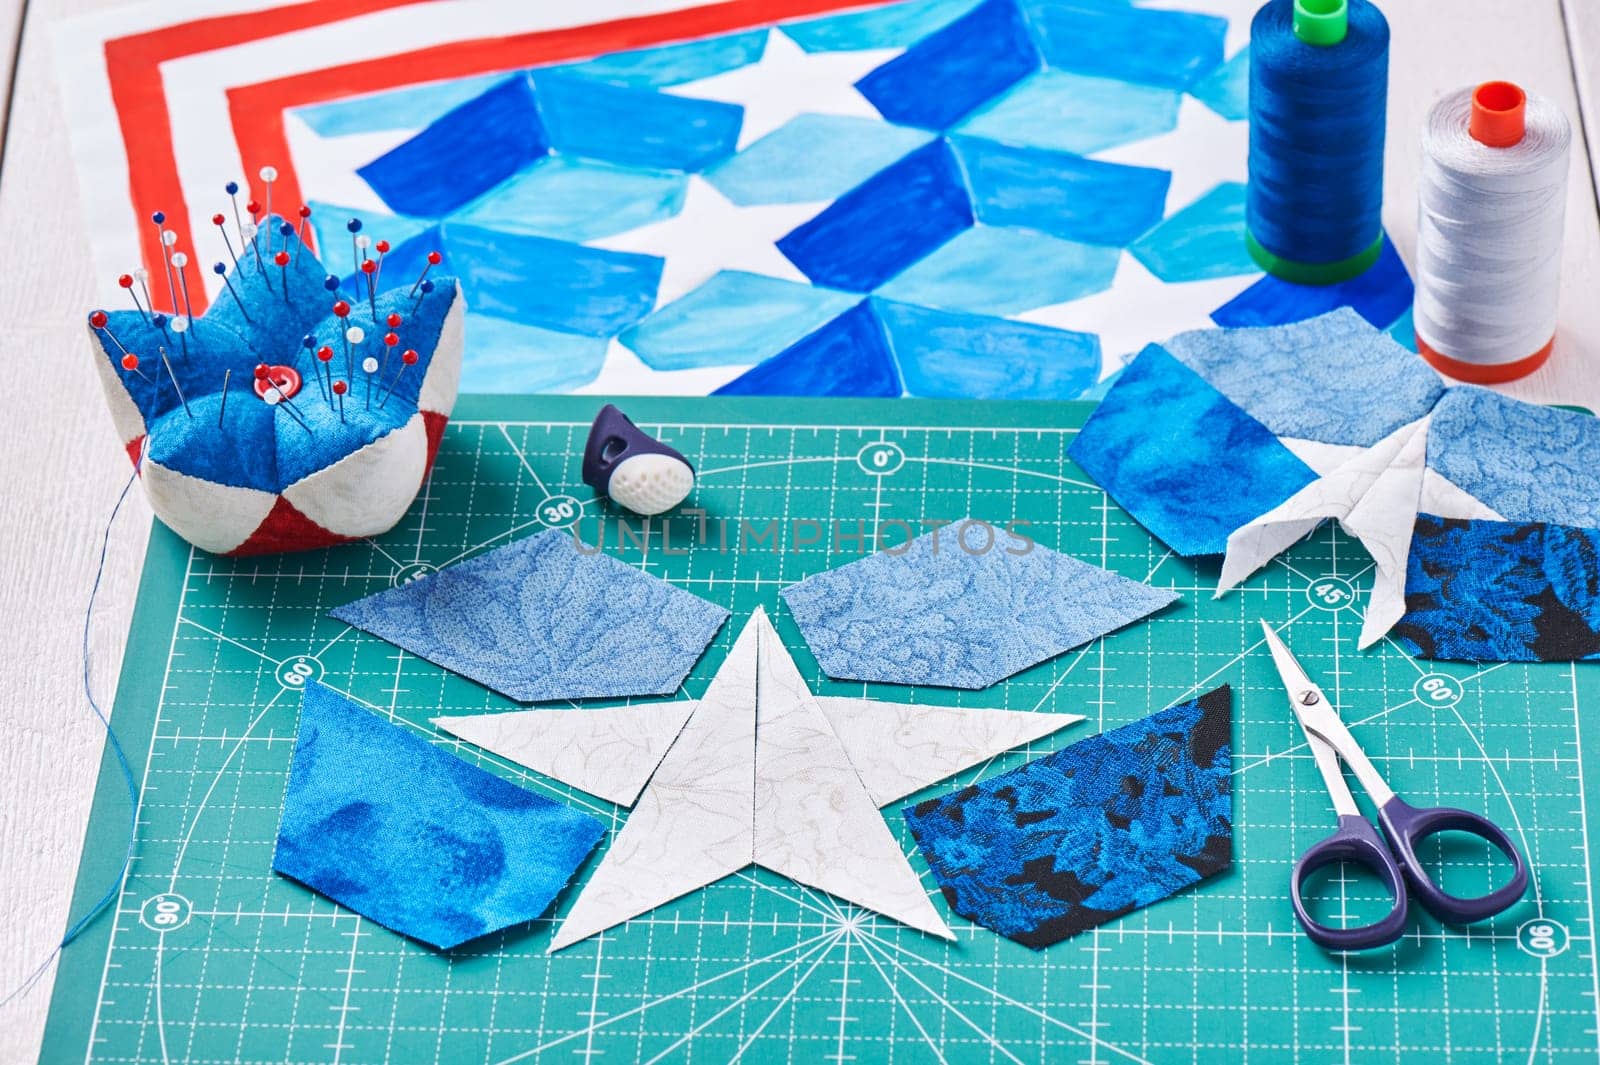 Sewing of quilt with stylized elements of American flag